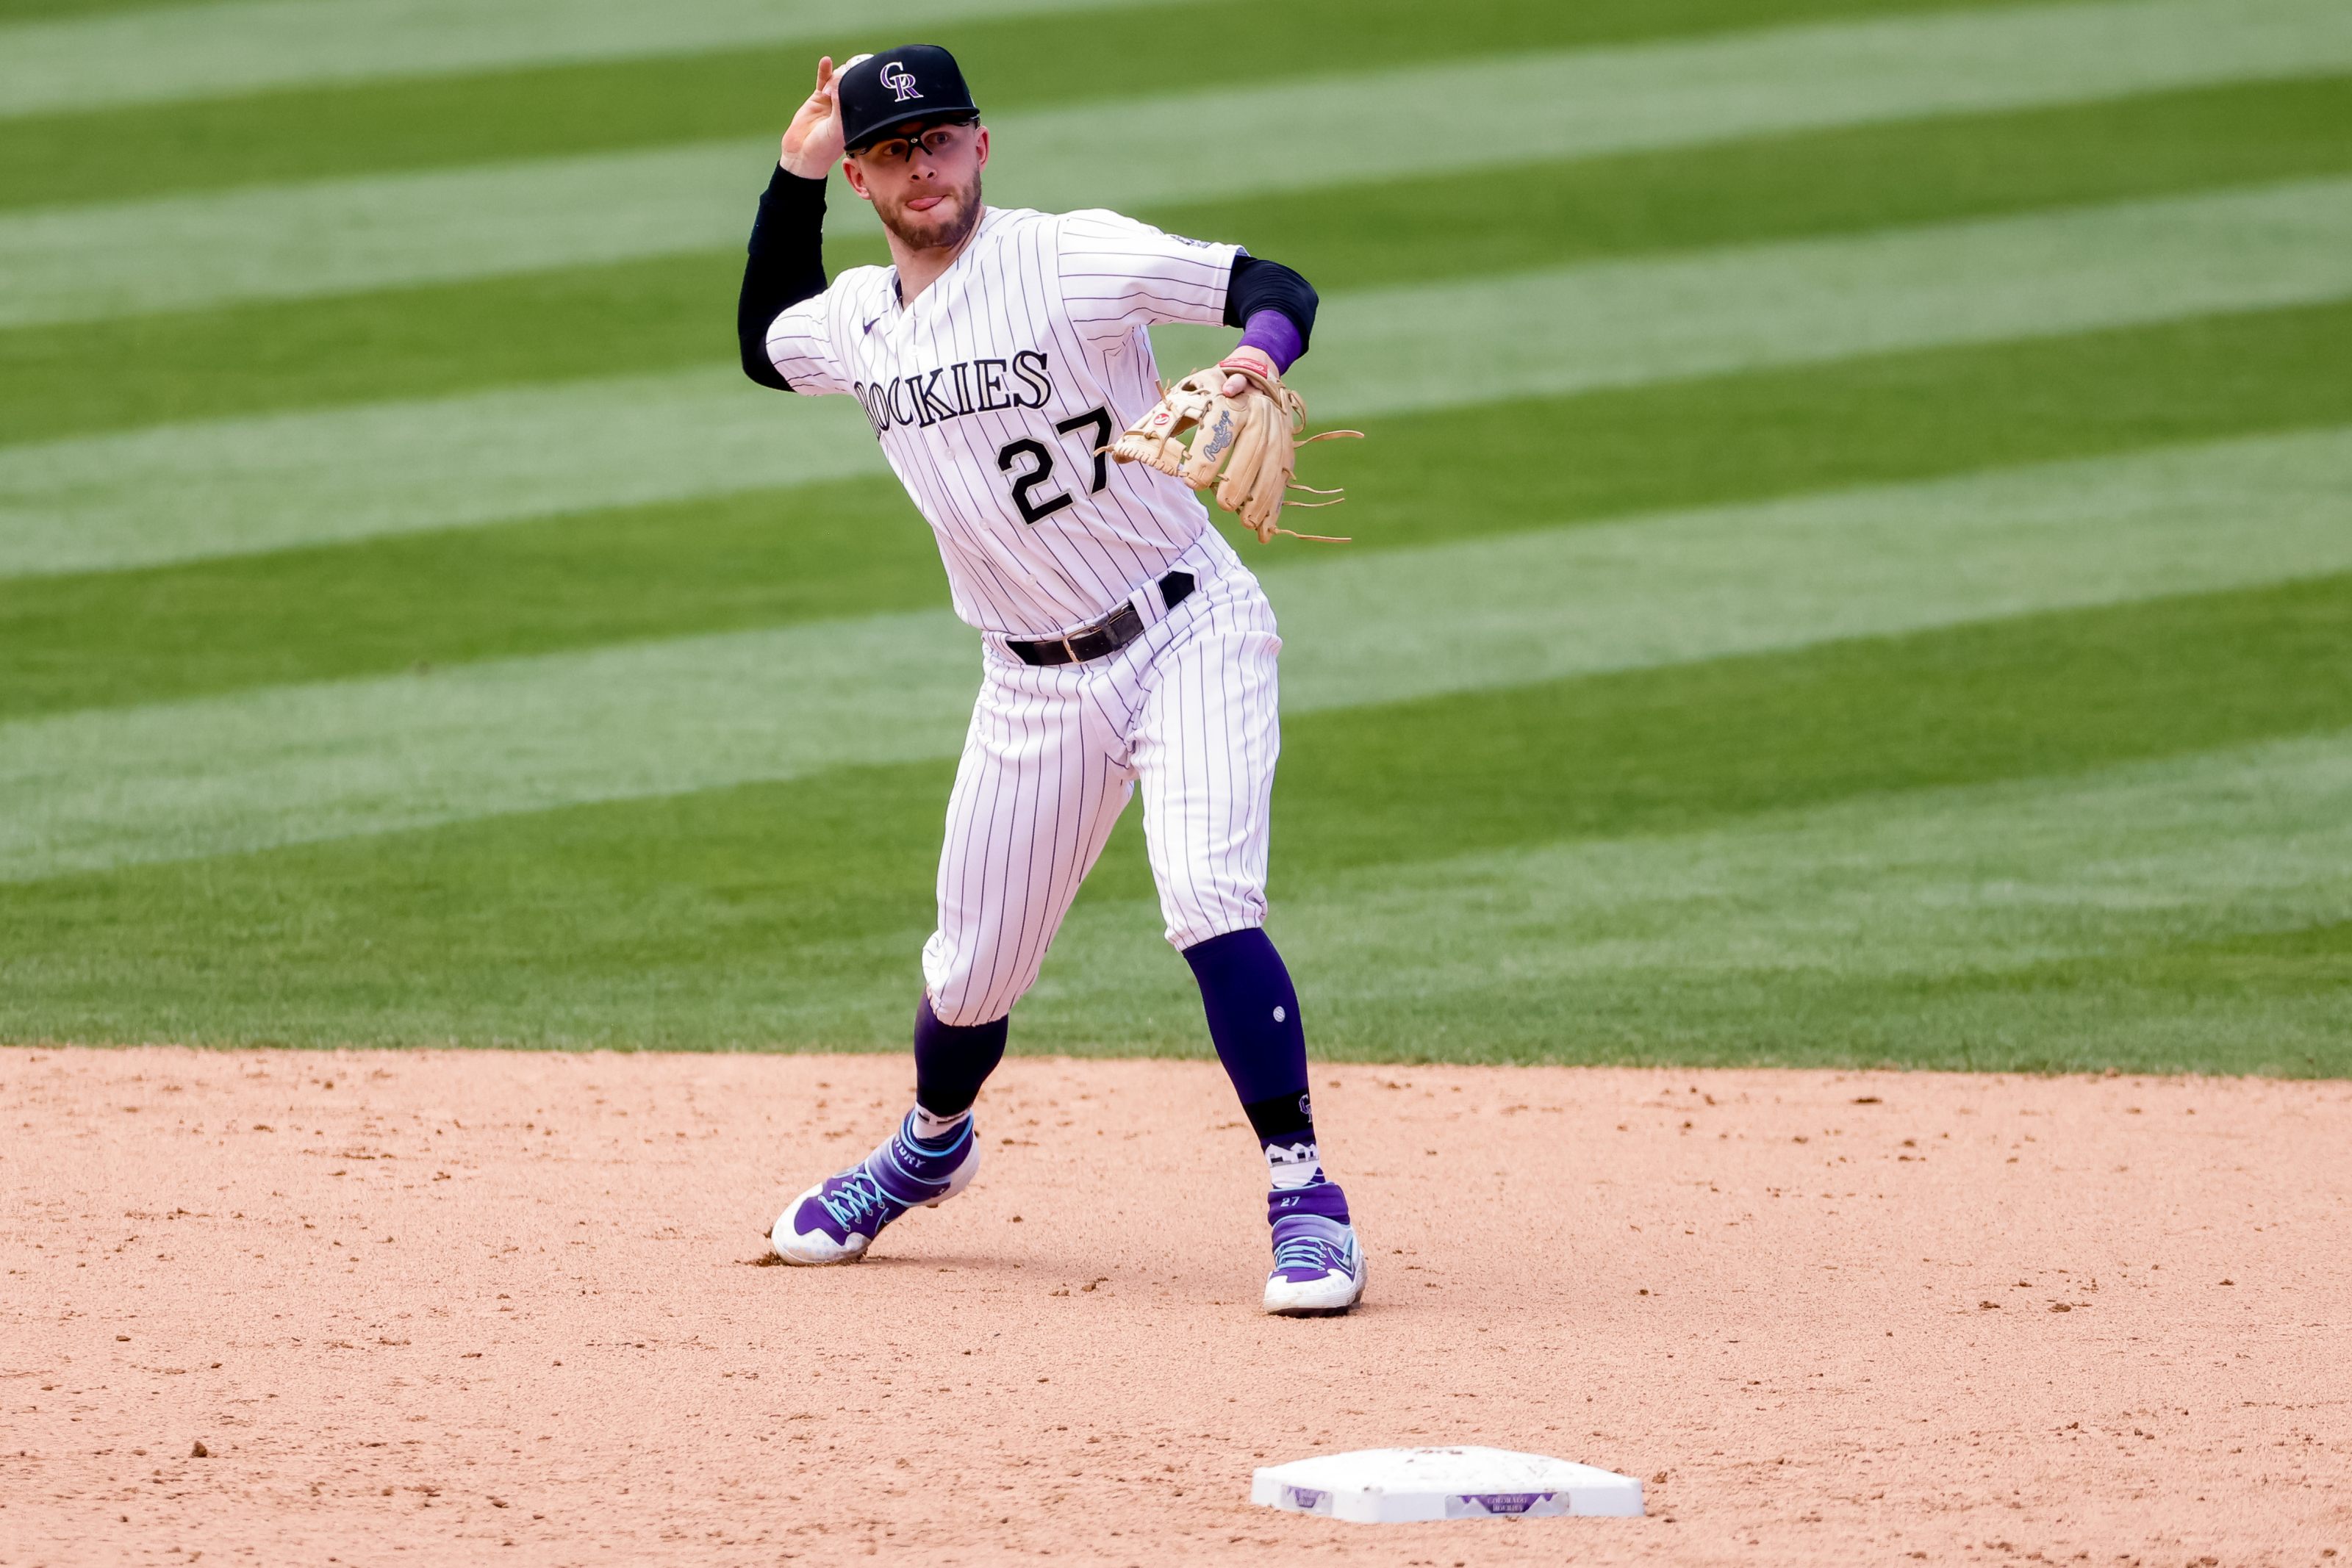 NY Yankee: The time is now to go after Trevor Story